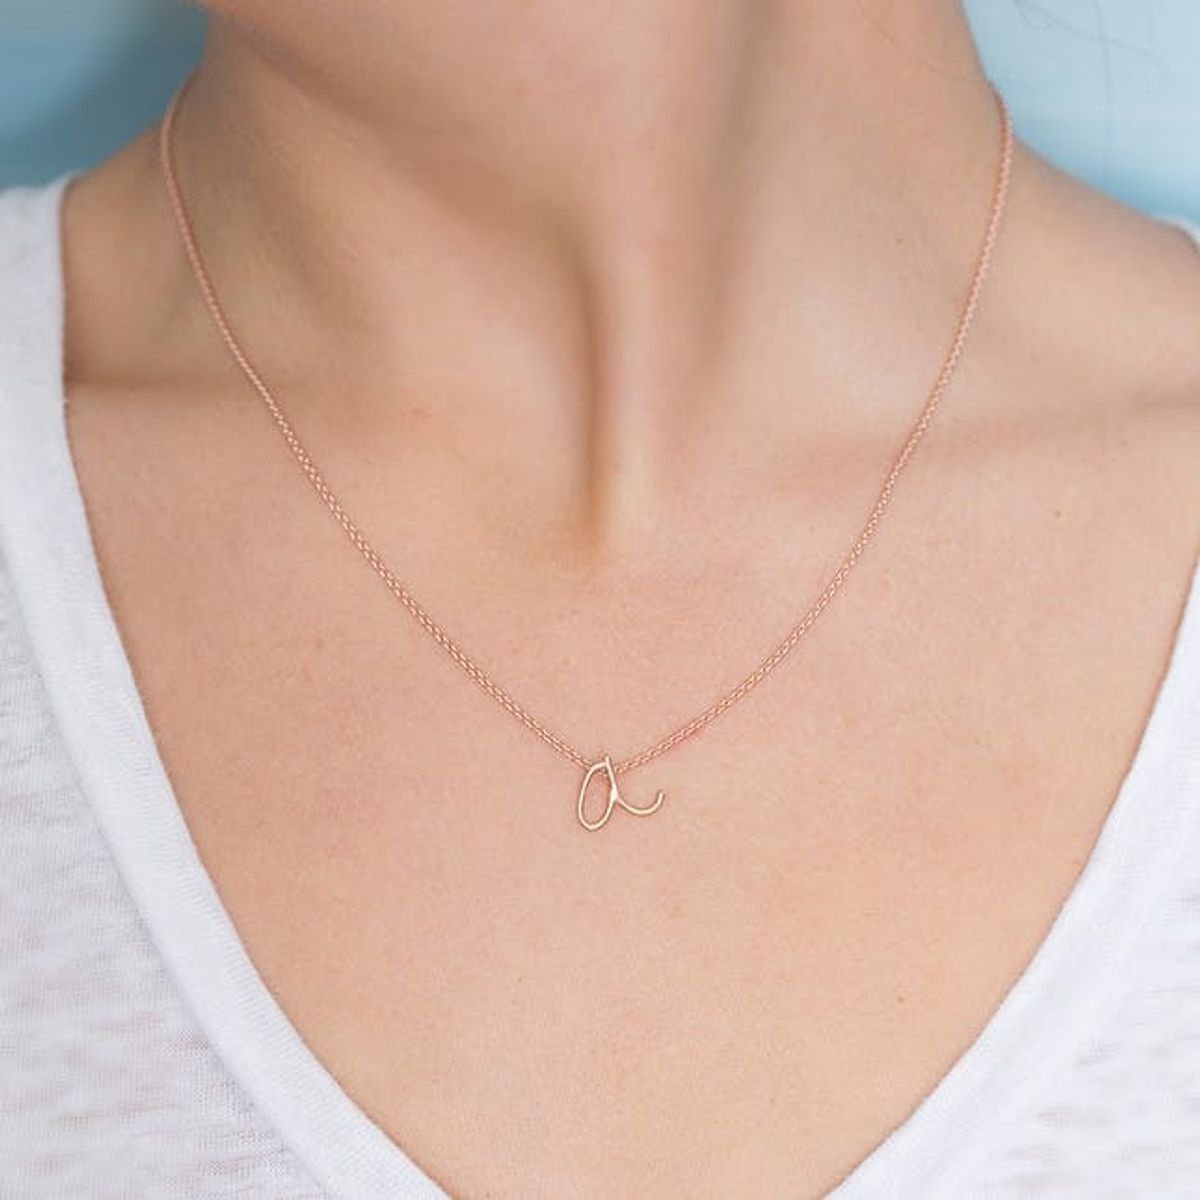 10 Dainty Jewelry Pieces for the Minimalist Lover